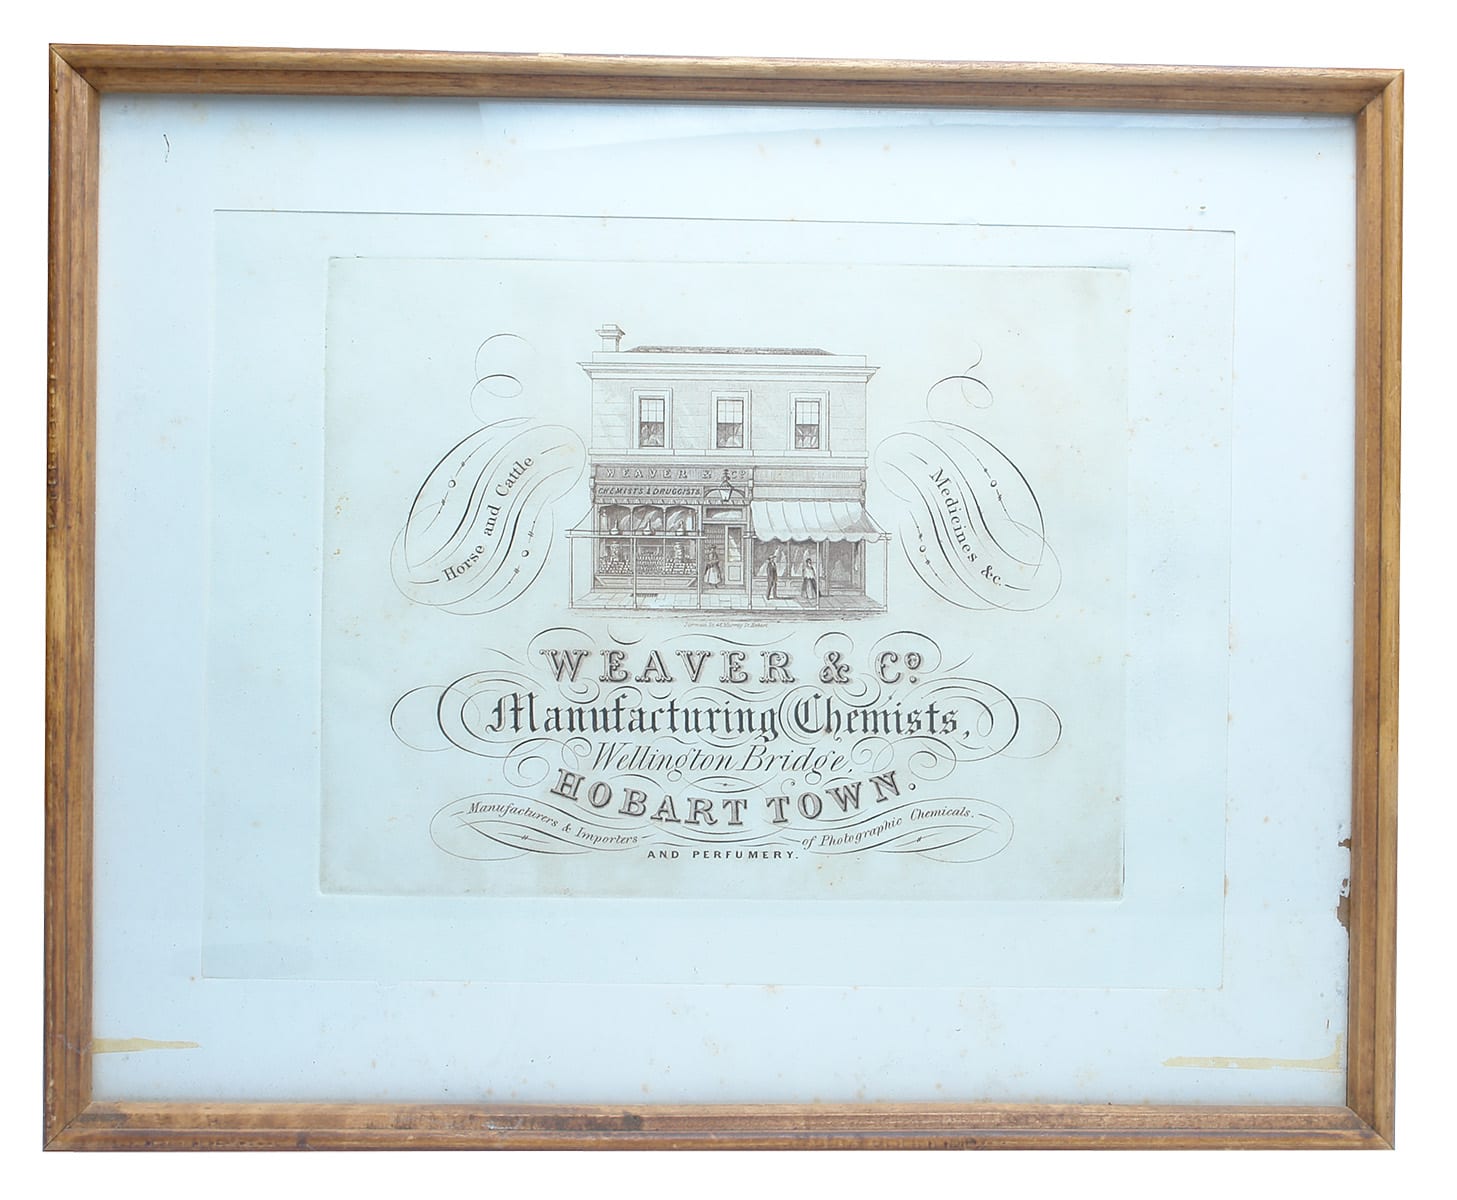 Weaver Manufacturing Chemists Hobart Town Advertising Sign